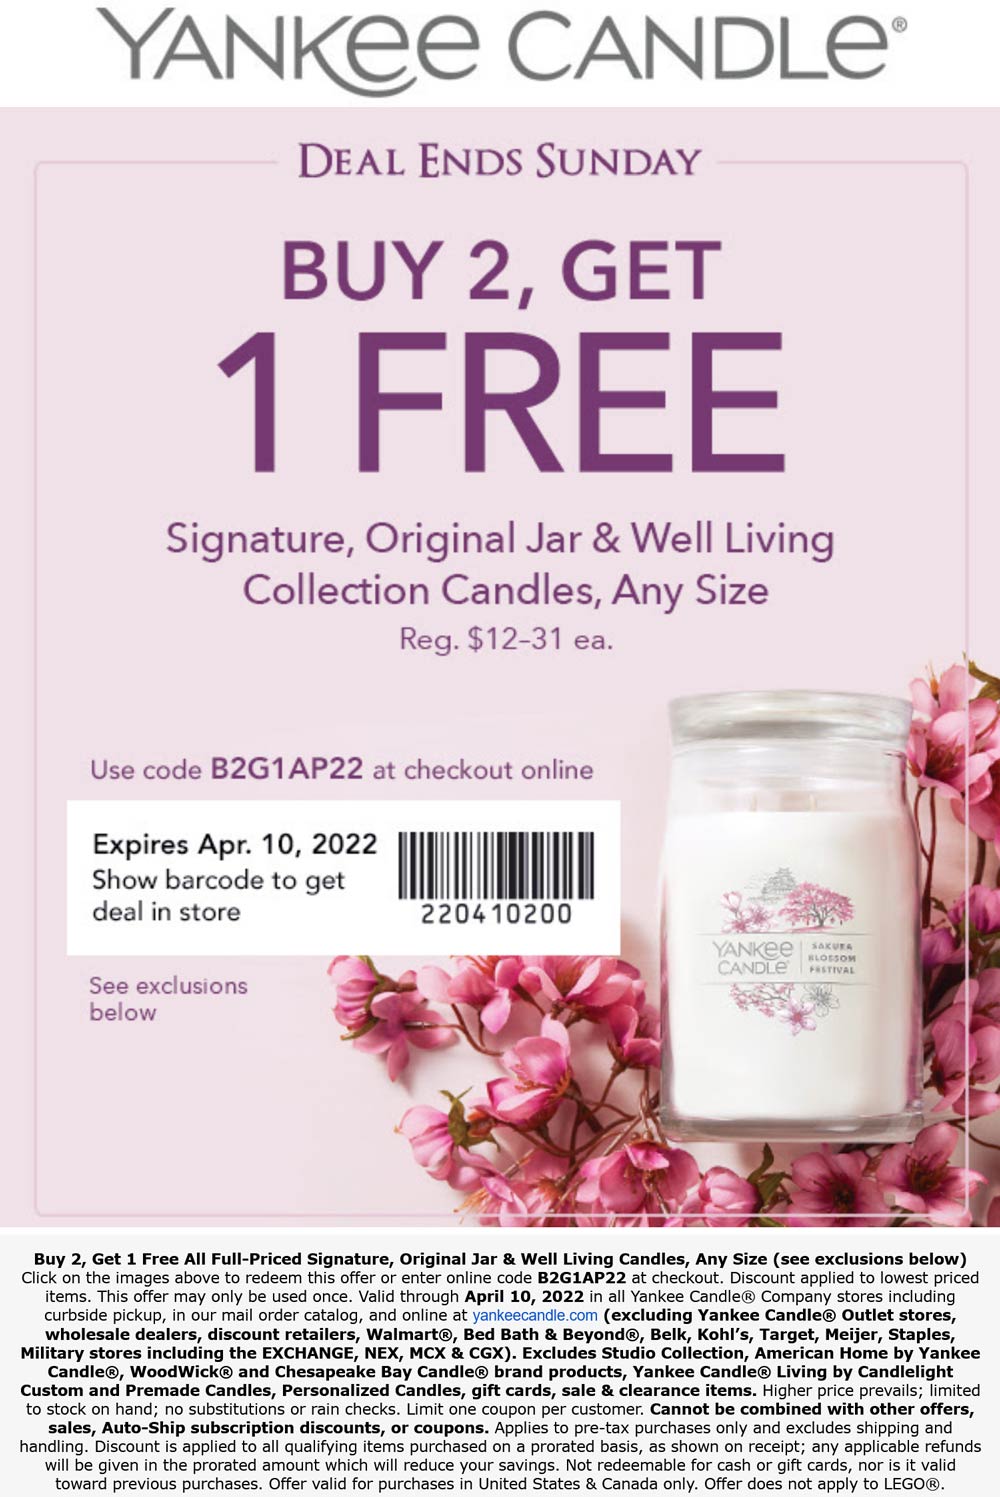 Yankee Candle stores Coupon  3rd candle free at Yankee Candle, or online via promo code B2G1AP22 #yankeecandle 